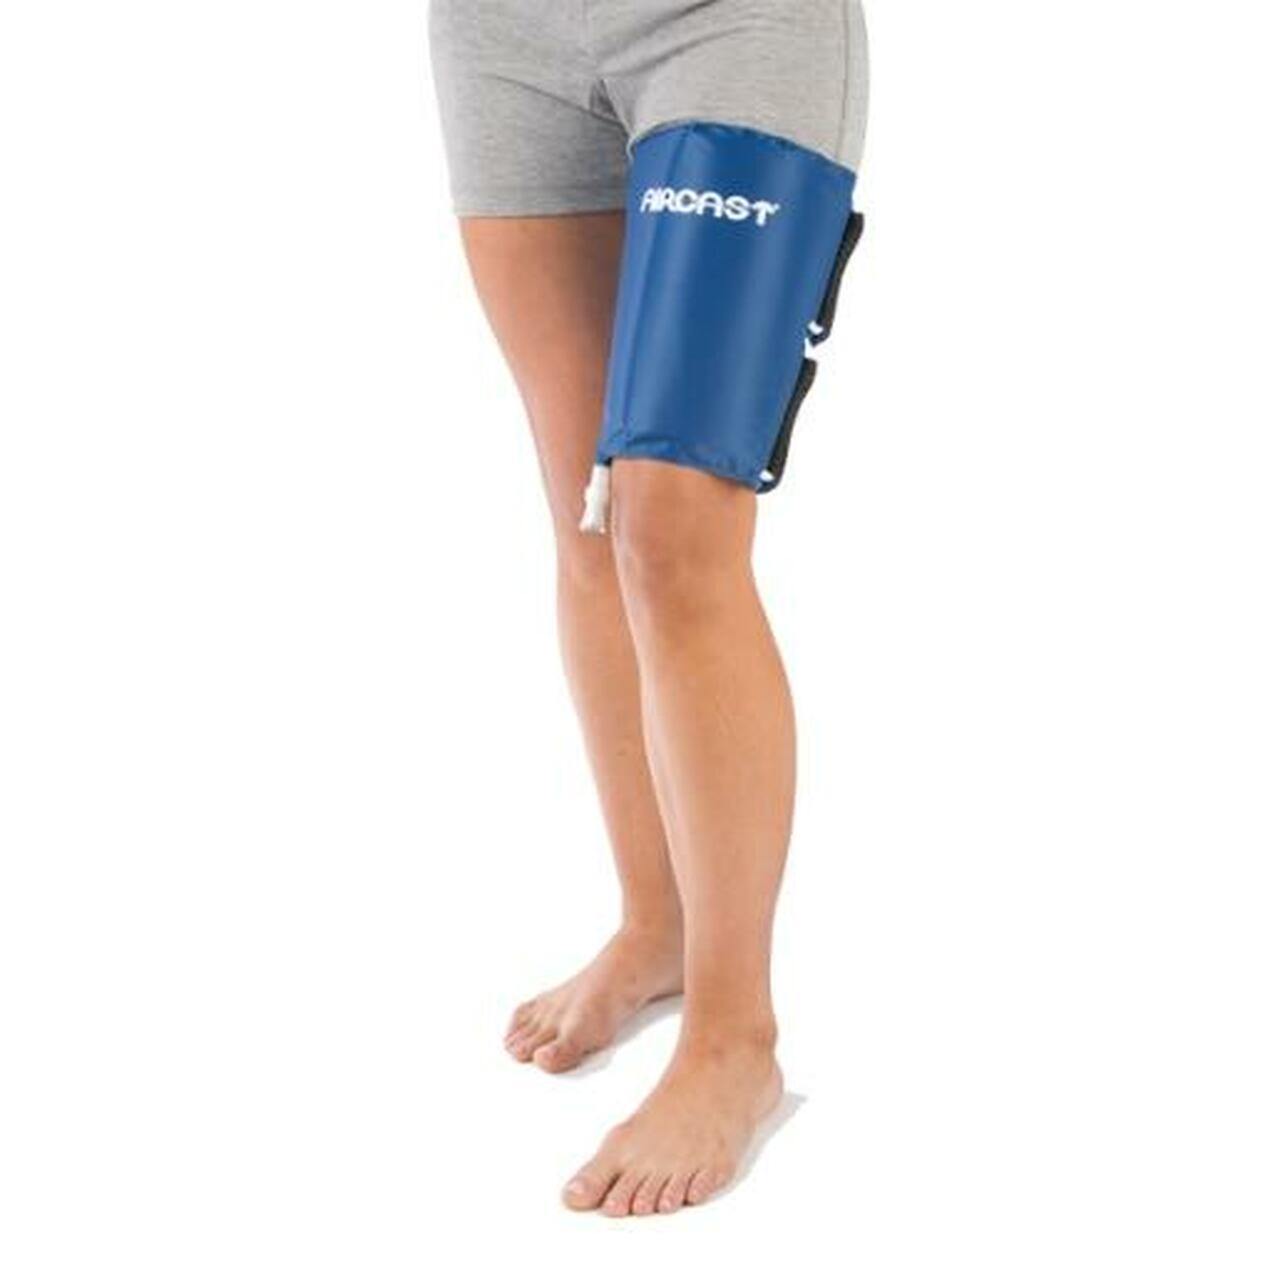 Aircast® Gravity Replacement Cryo/Cuffs - 13B01 Aircast® Gravity Replacement Cryo/Cuffs - undefined by Supply Physical Therapy Accessories, Aircast, Aircast Accessories, Ankle, Elbow, Foot and Ankle, Gravity, GravityMain, Hand and Wrist, Hip and Knee, Knee, Shoulder, Spine, Wraps